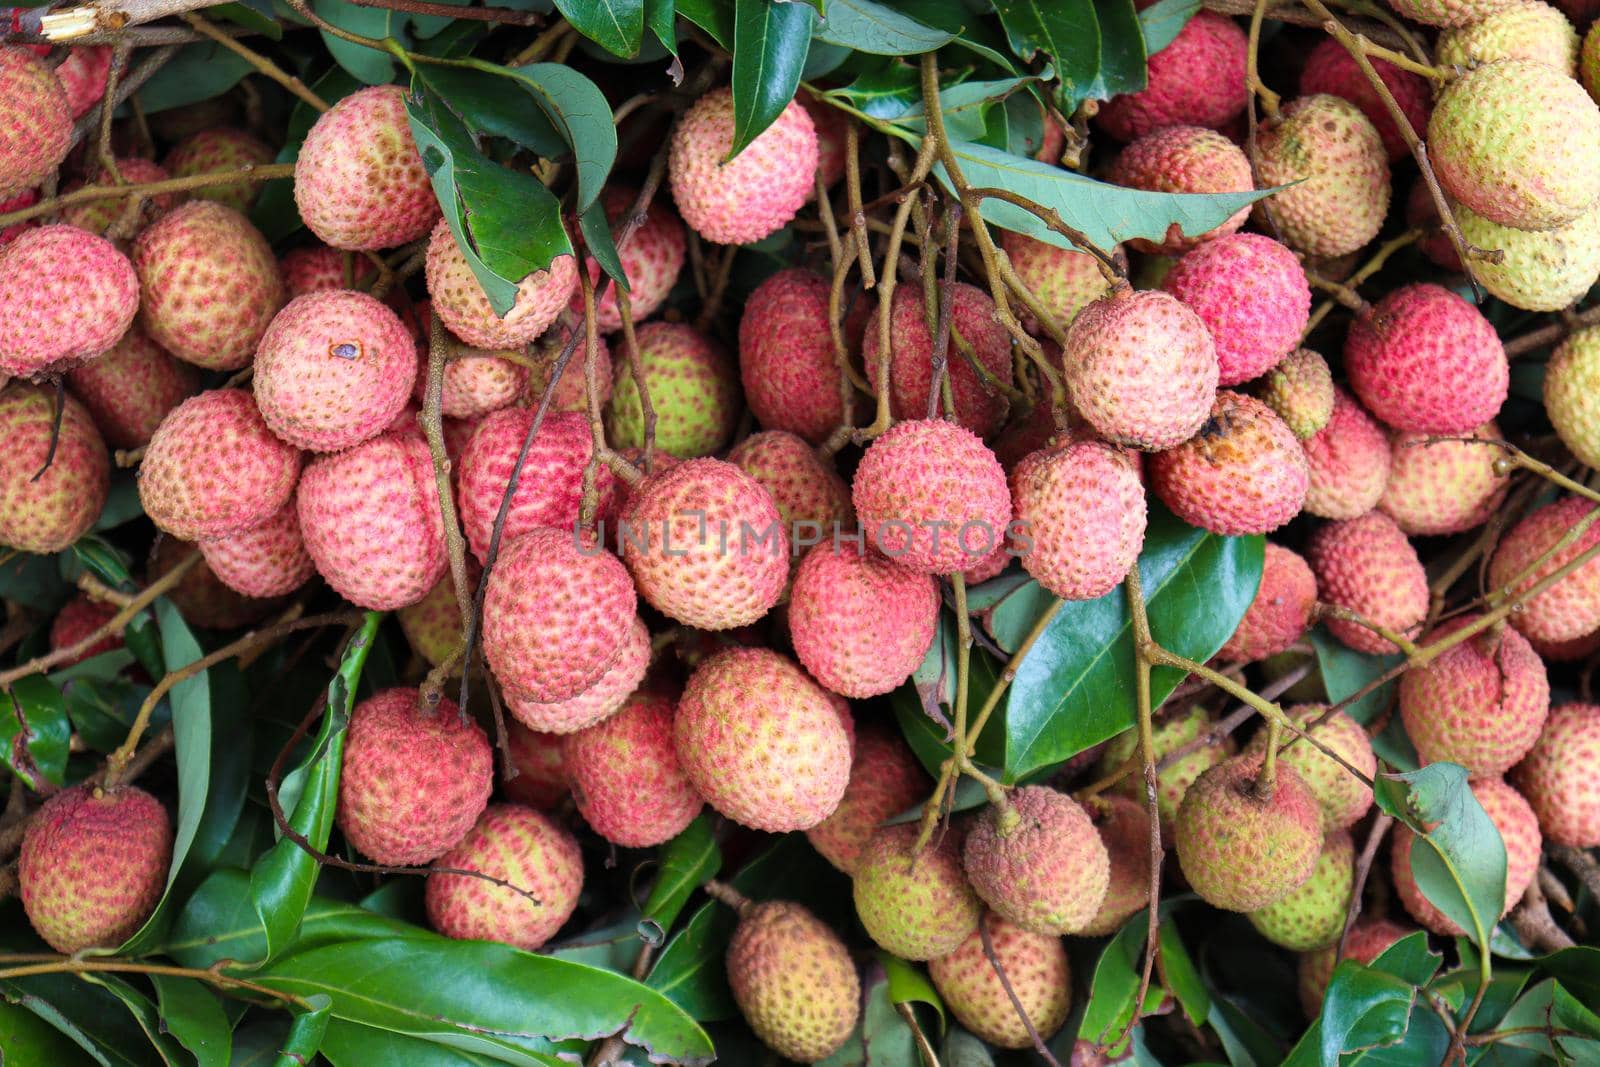 litchi bunch in farm for harvest by jahidul2358